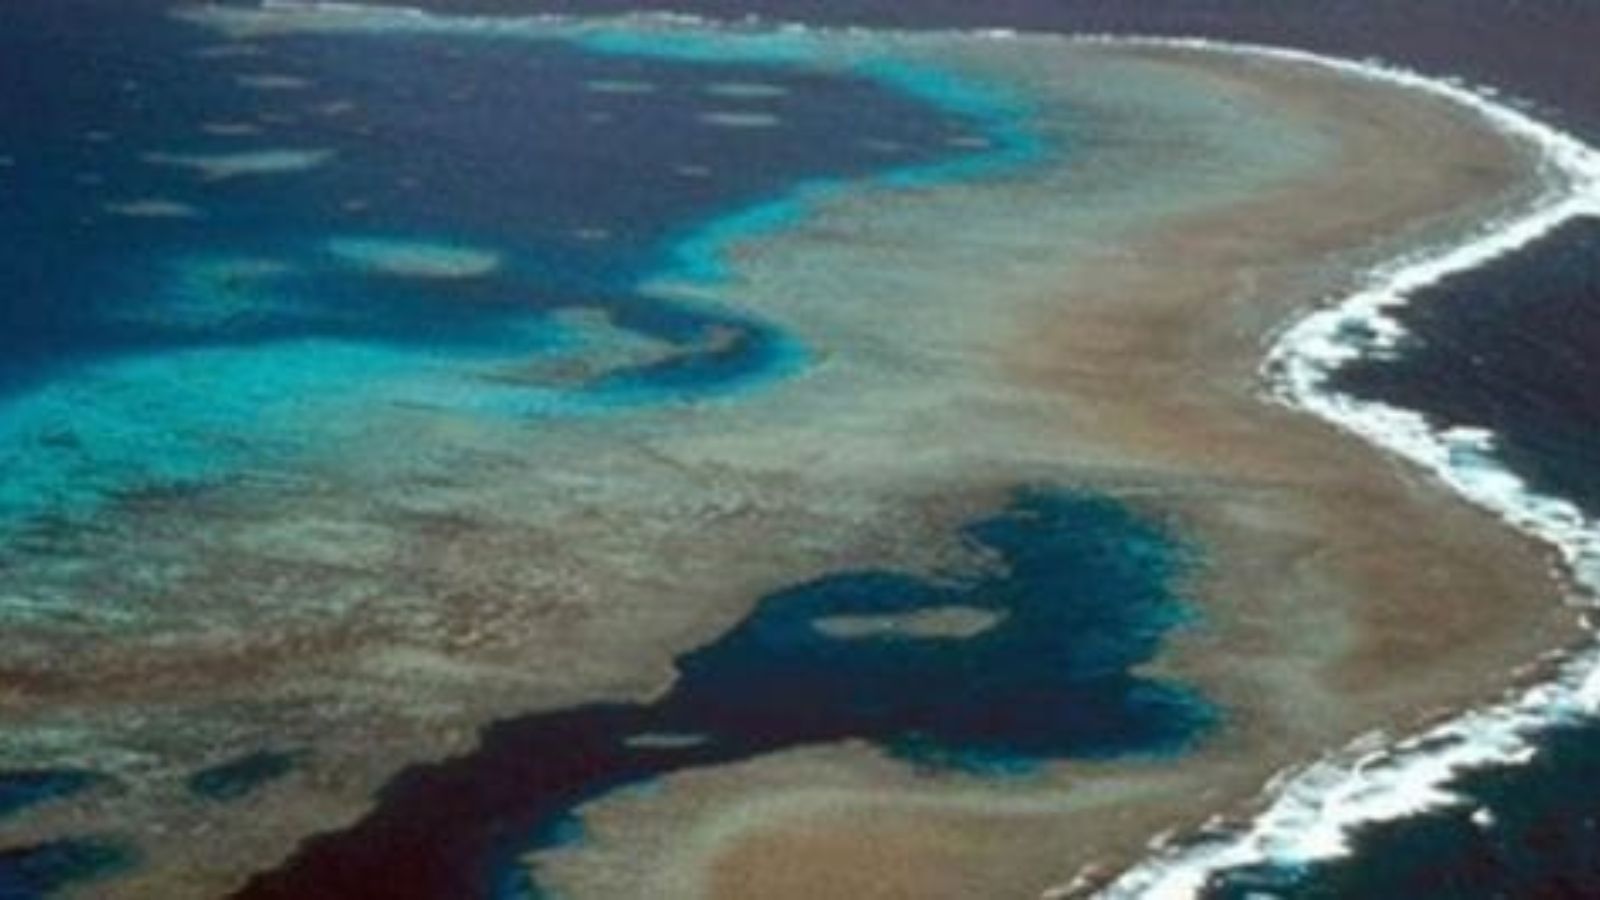 Australia: UNESCO declares Great Barrier Reef ‘seriously threatened’ and calls for urgent action | World News